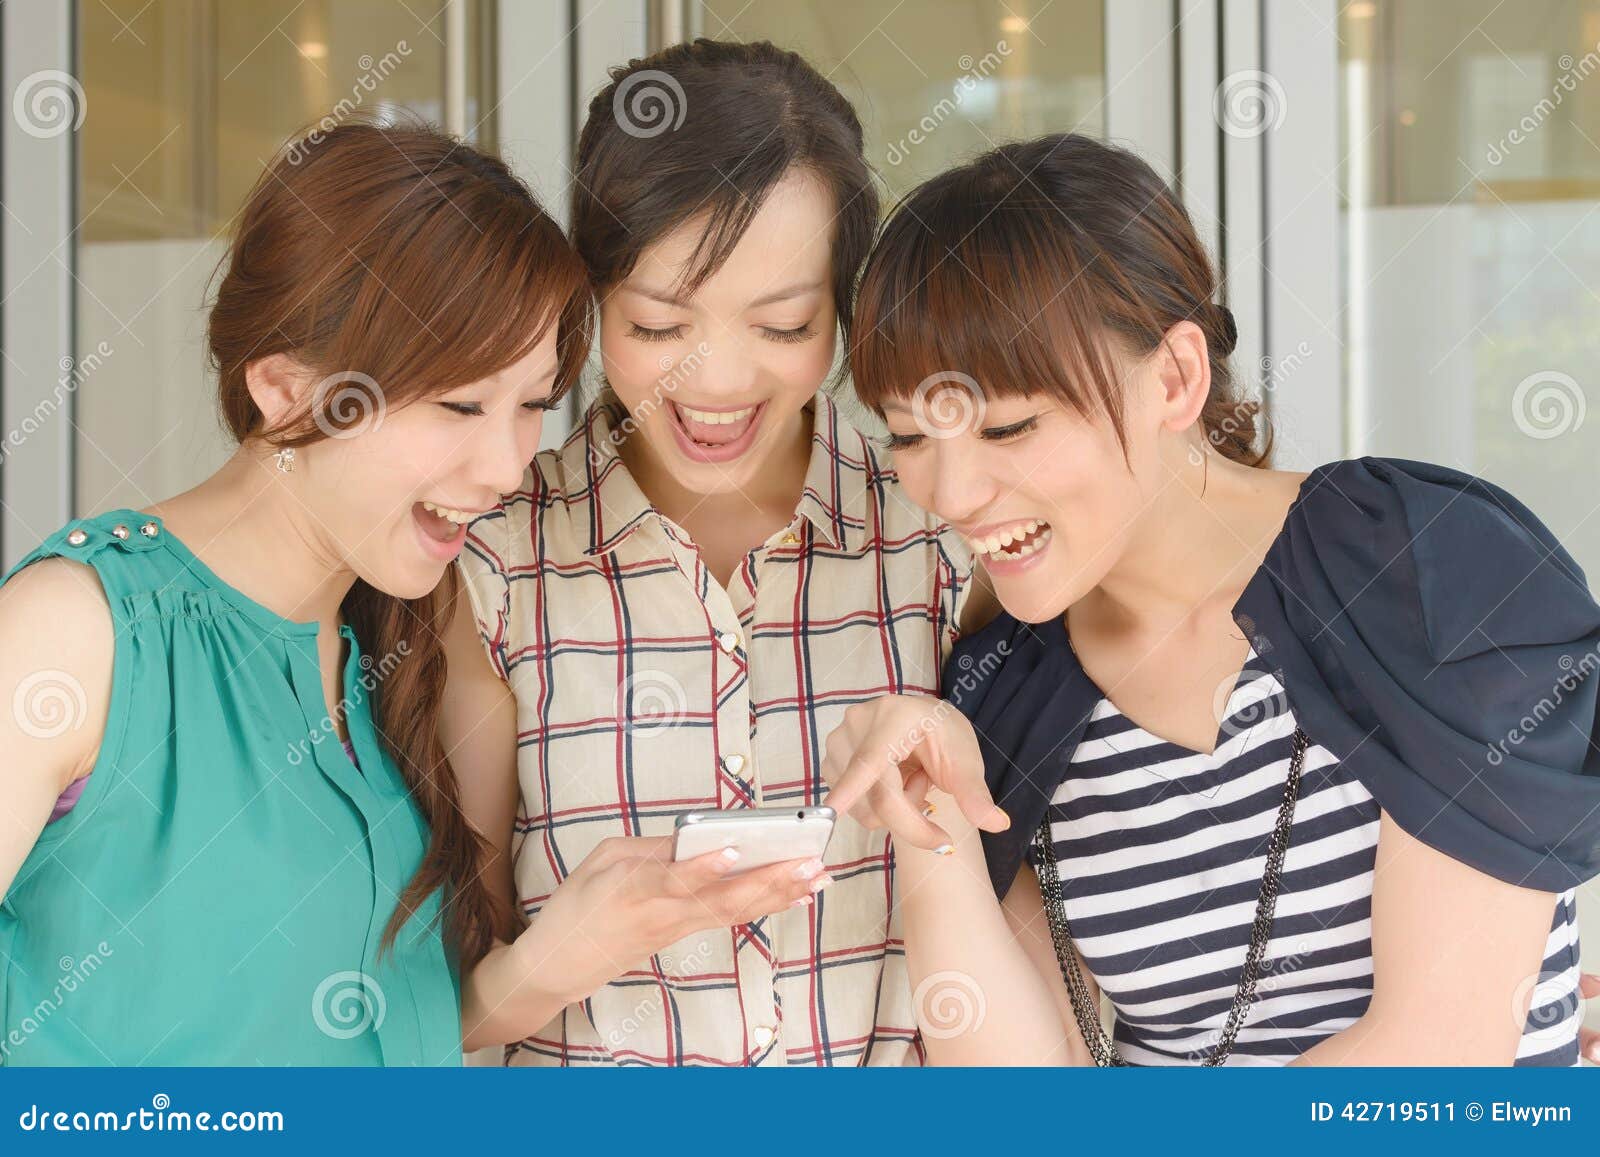 women looking at something on a cellphone